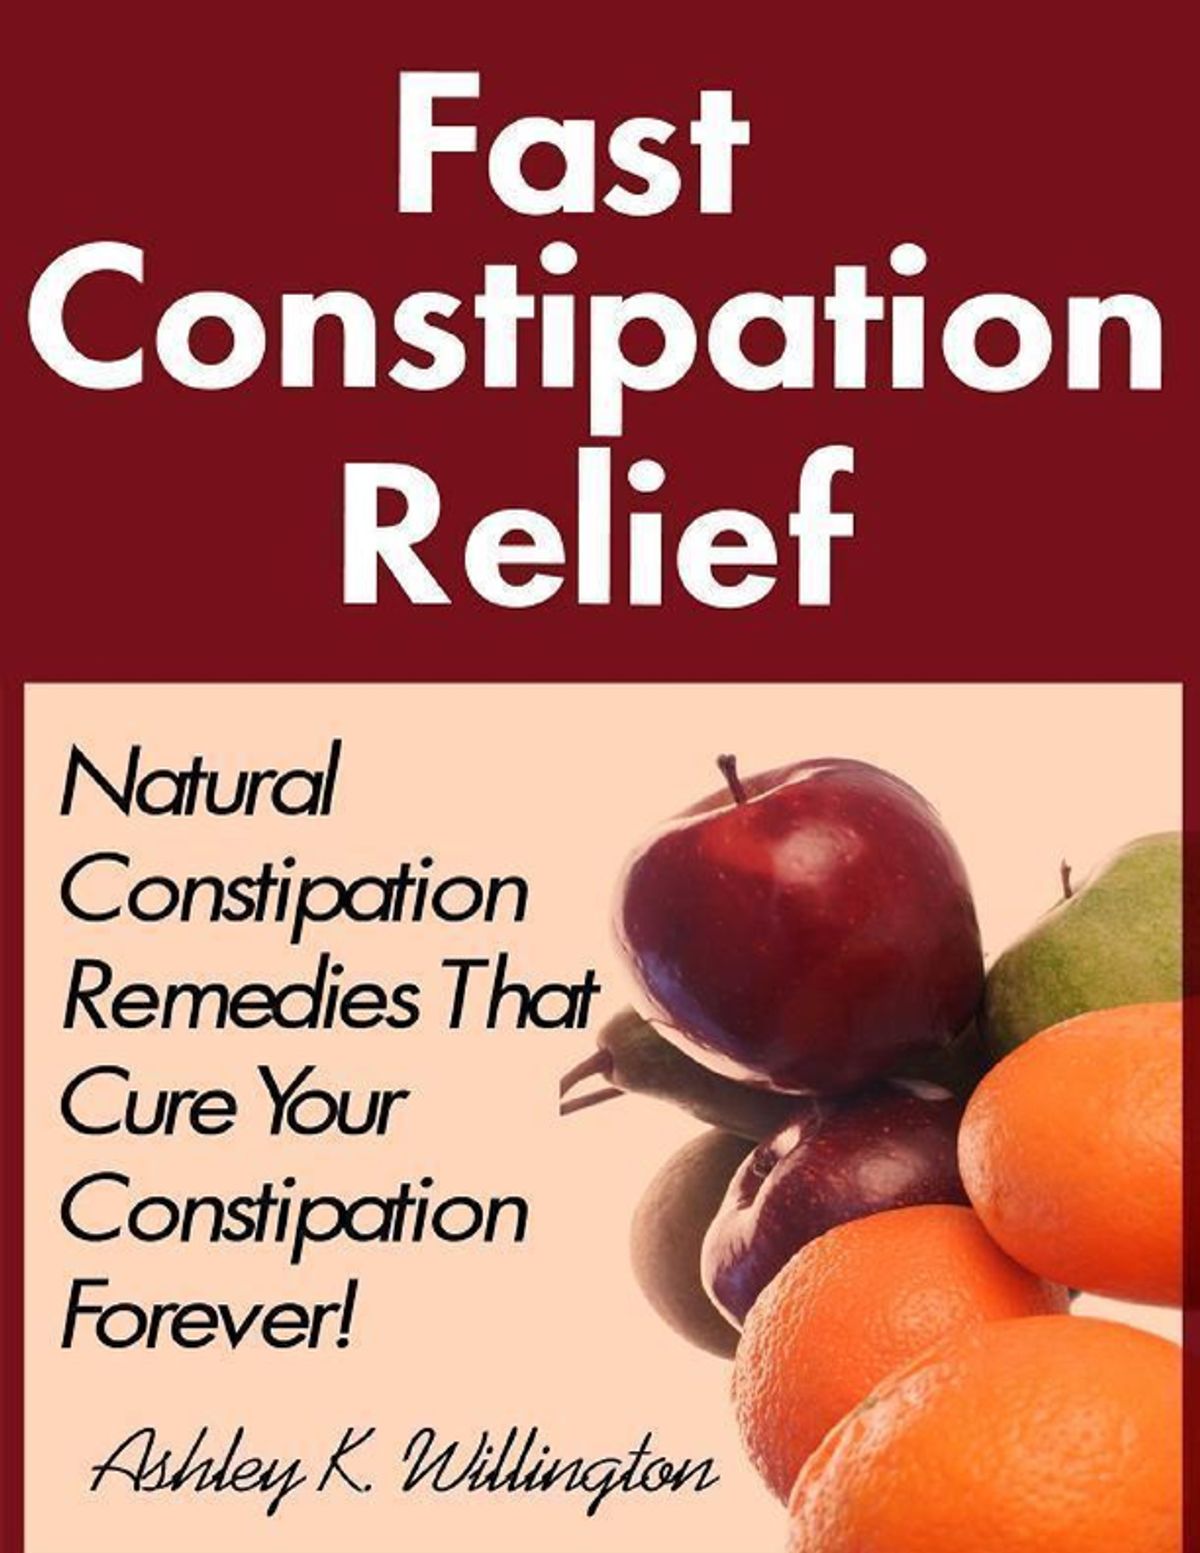 Best Motivation Blog: How To Treat Constipation Naturally